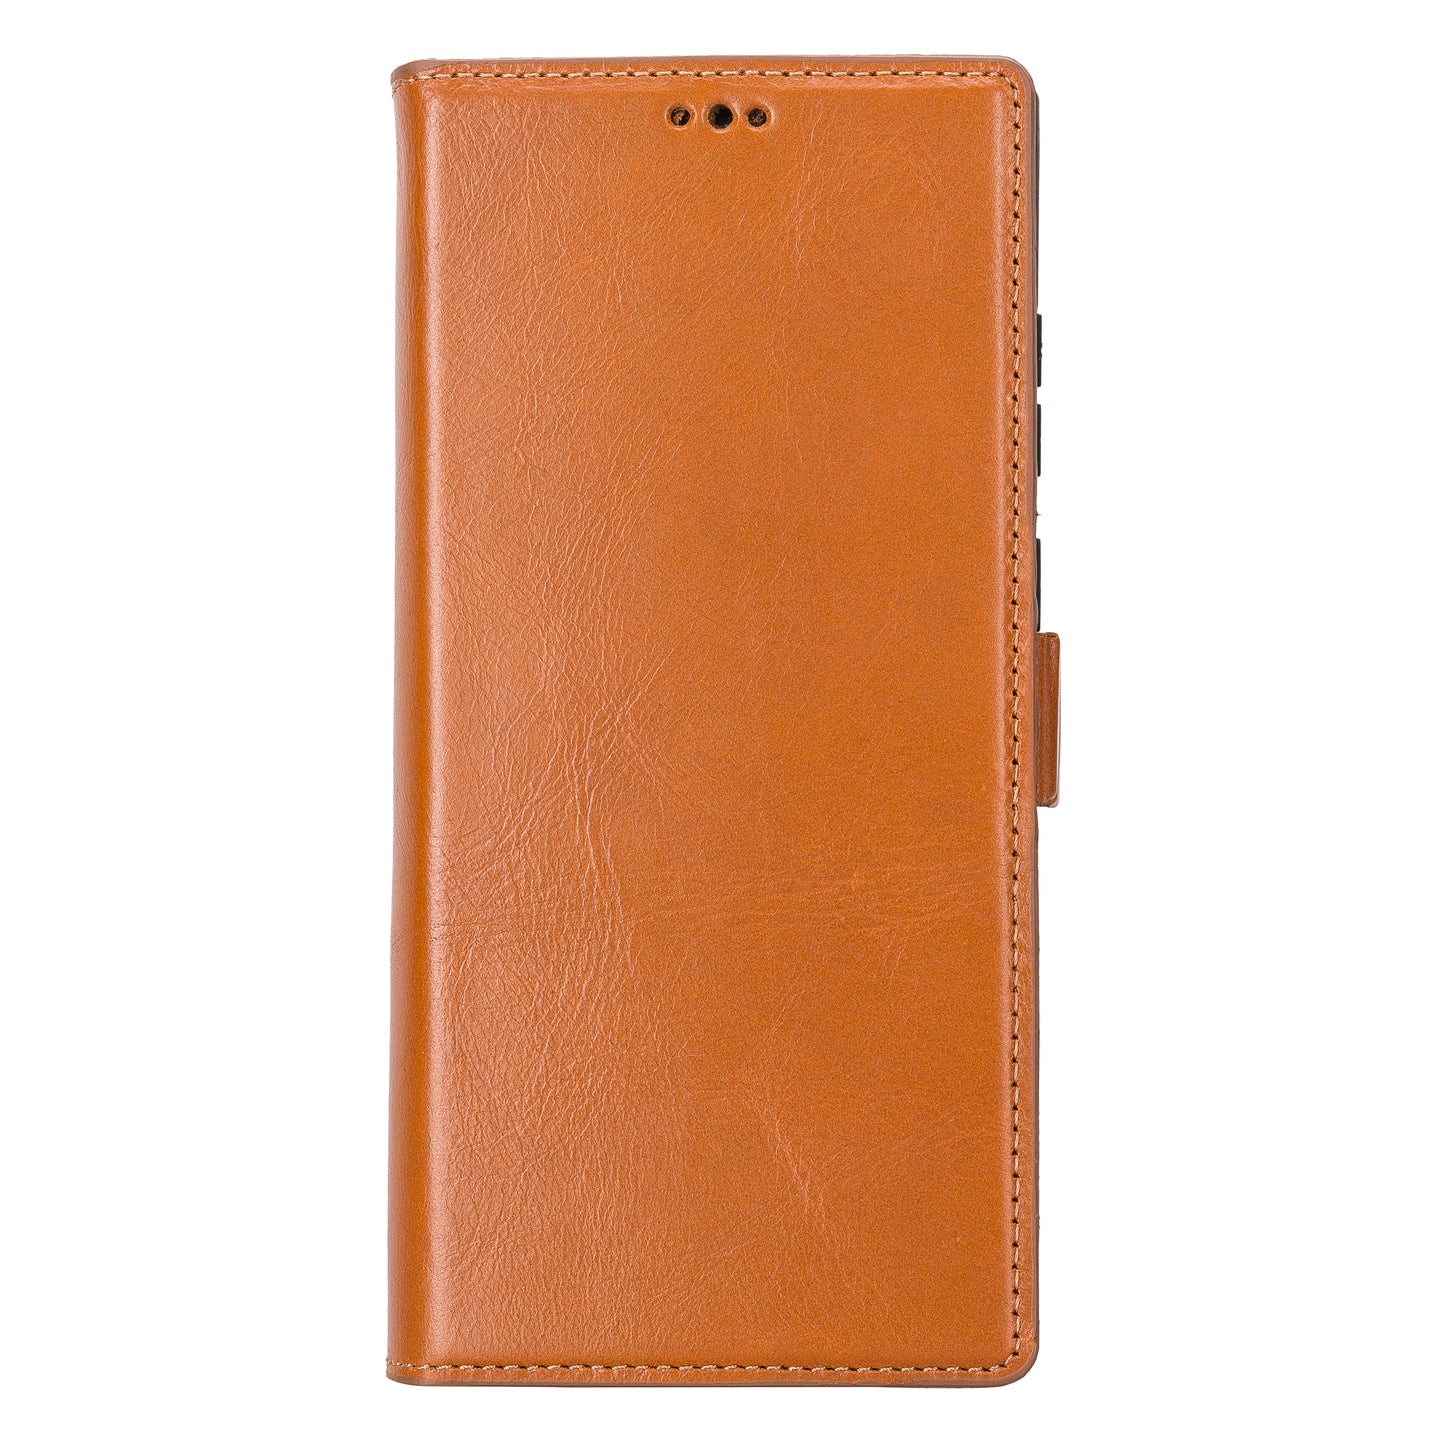 Samsung Galaxy S22 Ultra (6.8") Leather Wallet Case - Brown